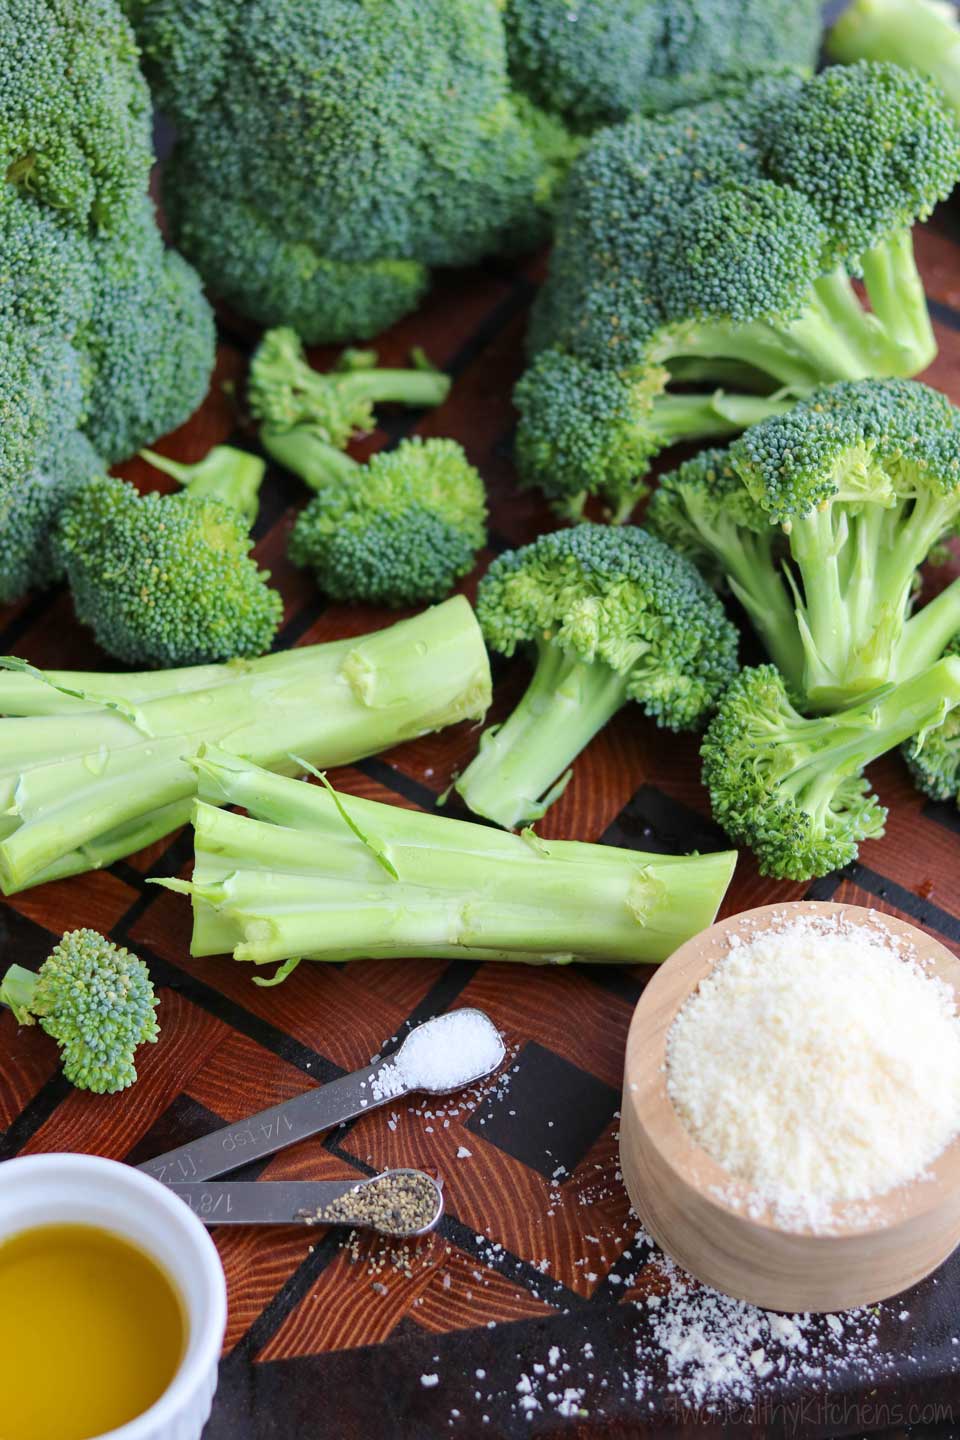 Besides leftover broccoli stalks, all you need for this easy side dish recipe is some parmesan cheese, plus a bit of olive oil, salt and pepper. So simple! This oven roasted broccoli recipe makes a great, healthy snack, too!